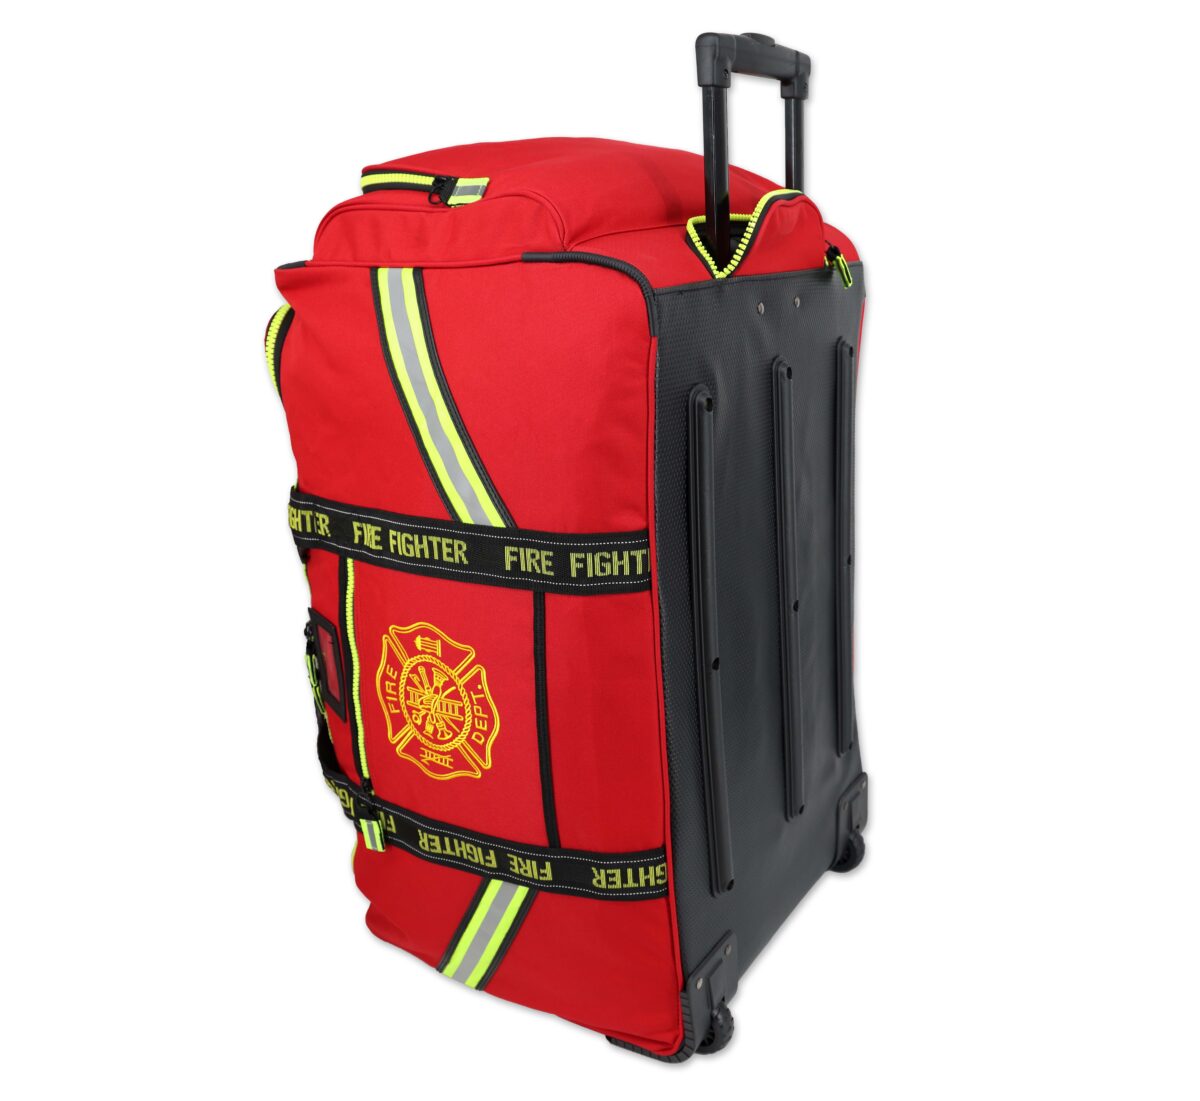 lightning x lxfb60 premium rolling firefighter turnout gear bag with wheels and retractable luggage handle black or red fluorescent reflective